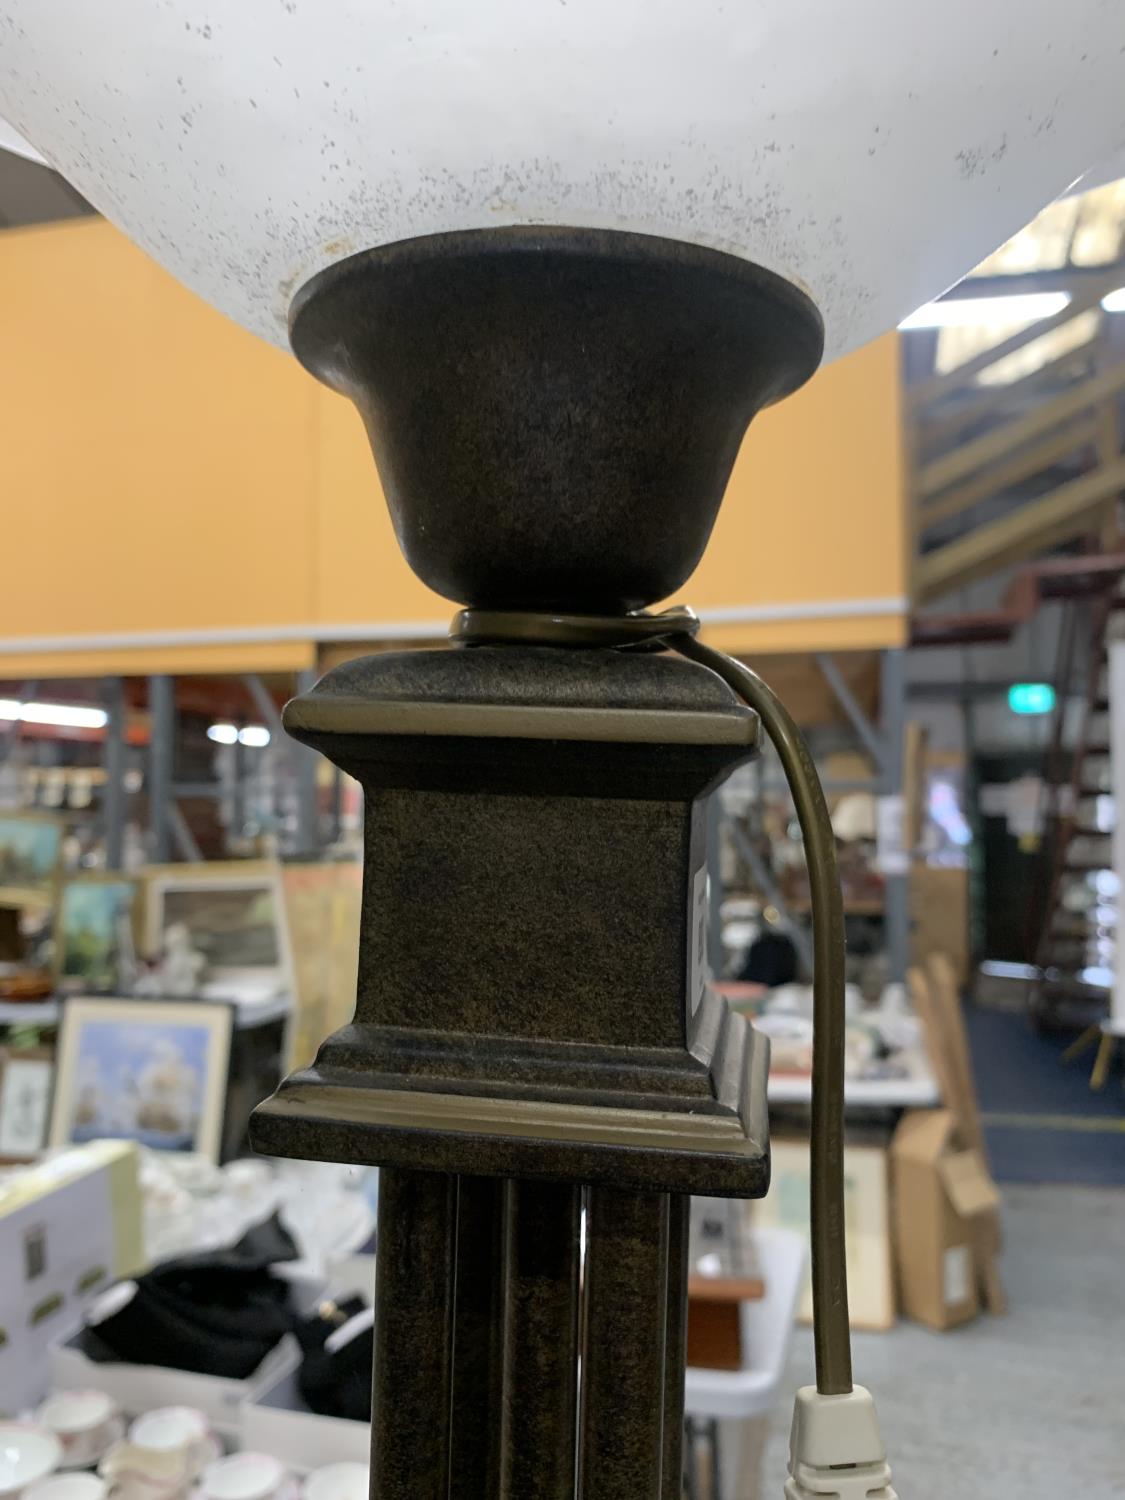 A HEAVY METAL, COLUMN, UPLIGHTER STANDARD LAMP, WITH PEDESTAL BASE, 5FT, 6" TALL - Image 4 of 4